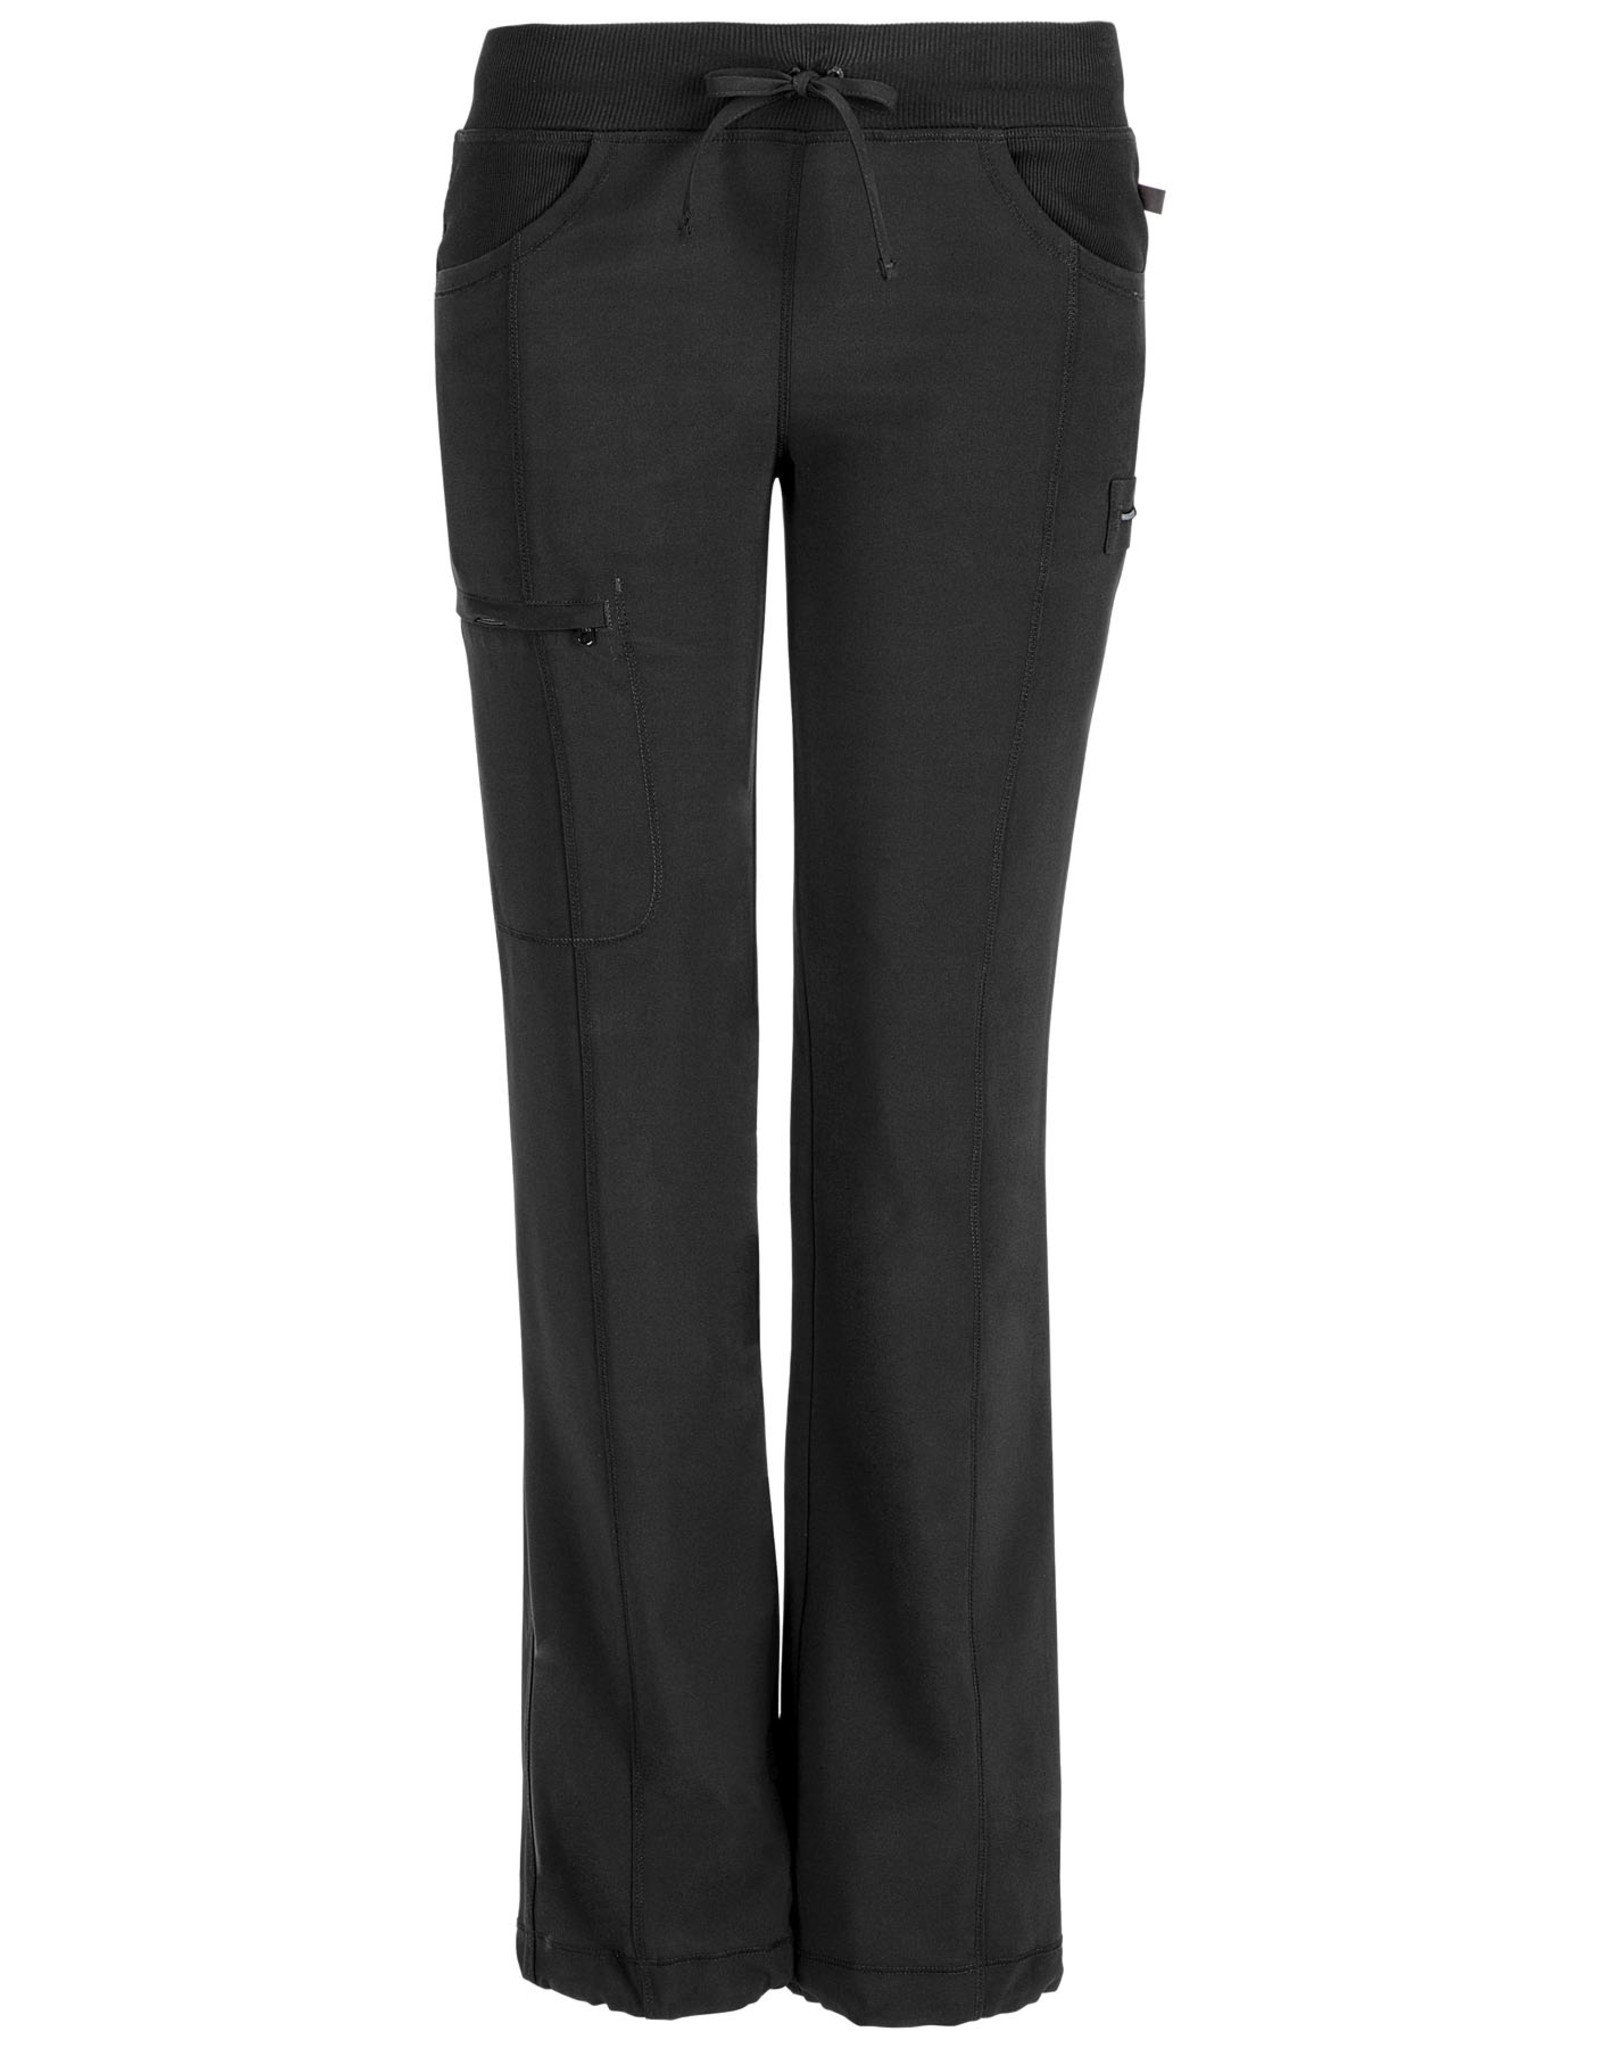 Infinity Collection 1123A Cherokee Infinity Womens' Low Rise Straight Leg Drawstring Pant